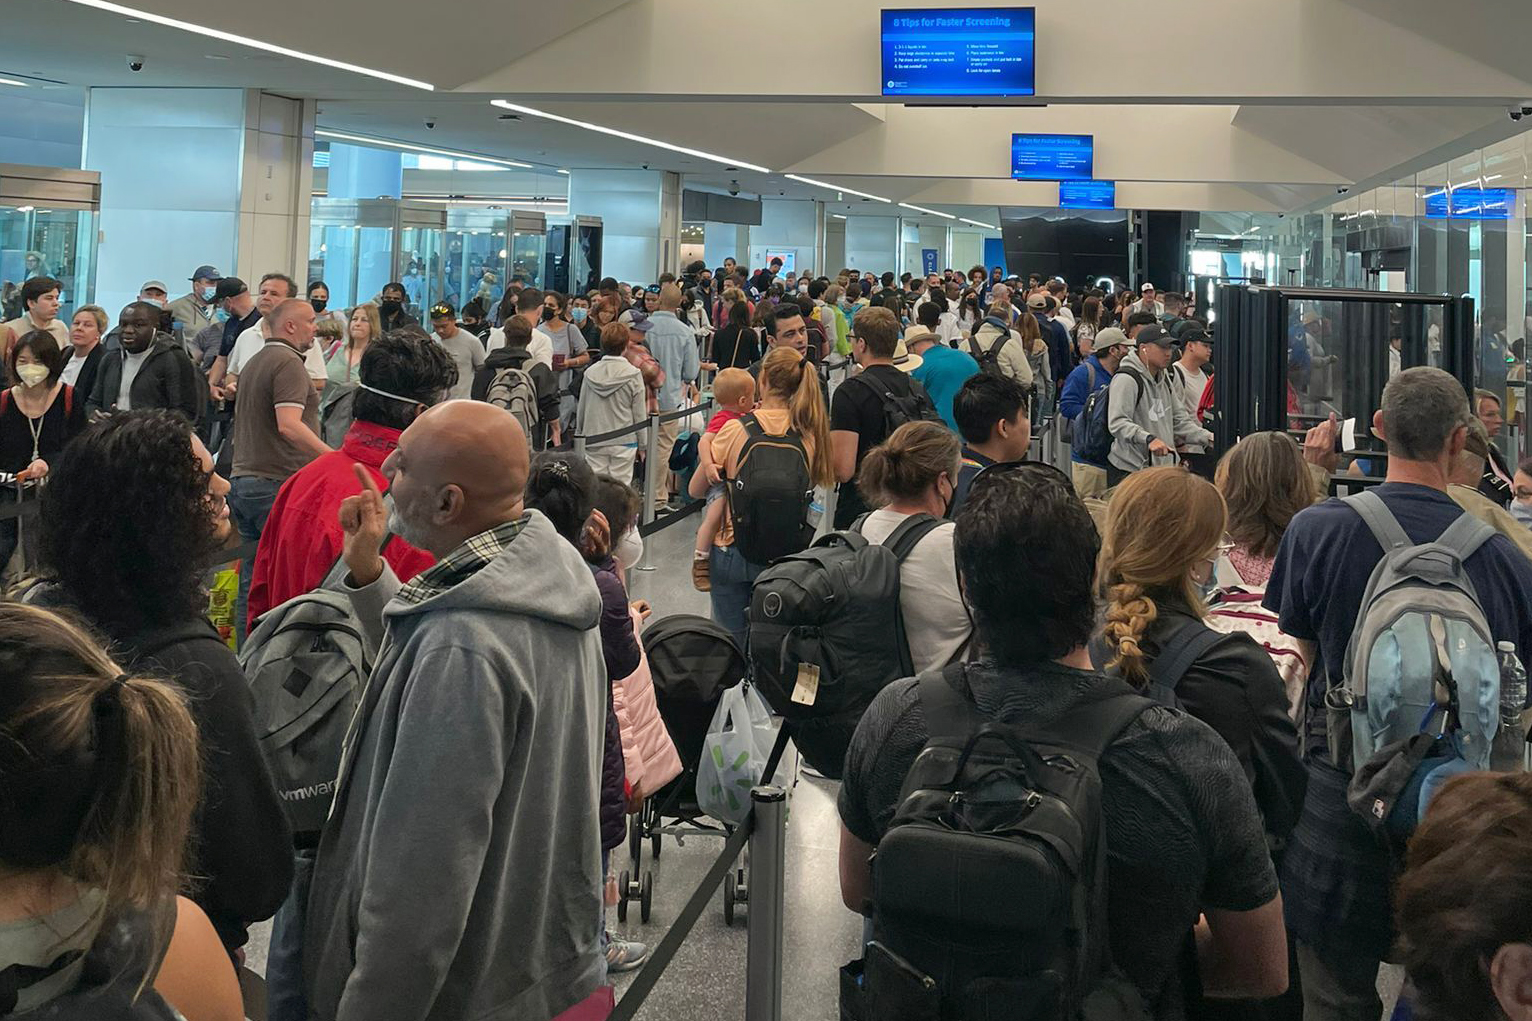 Get to the Airport Early: SFO Passengers Report Hours-Long Security Lines, Restaurant Closures 